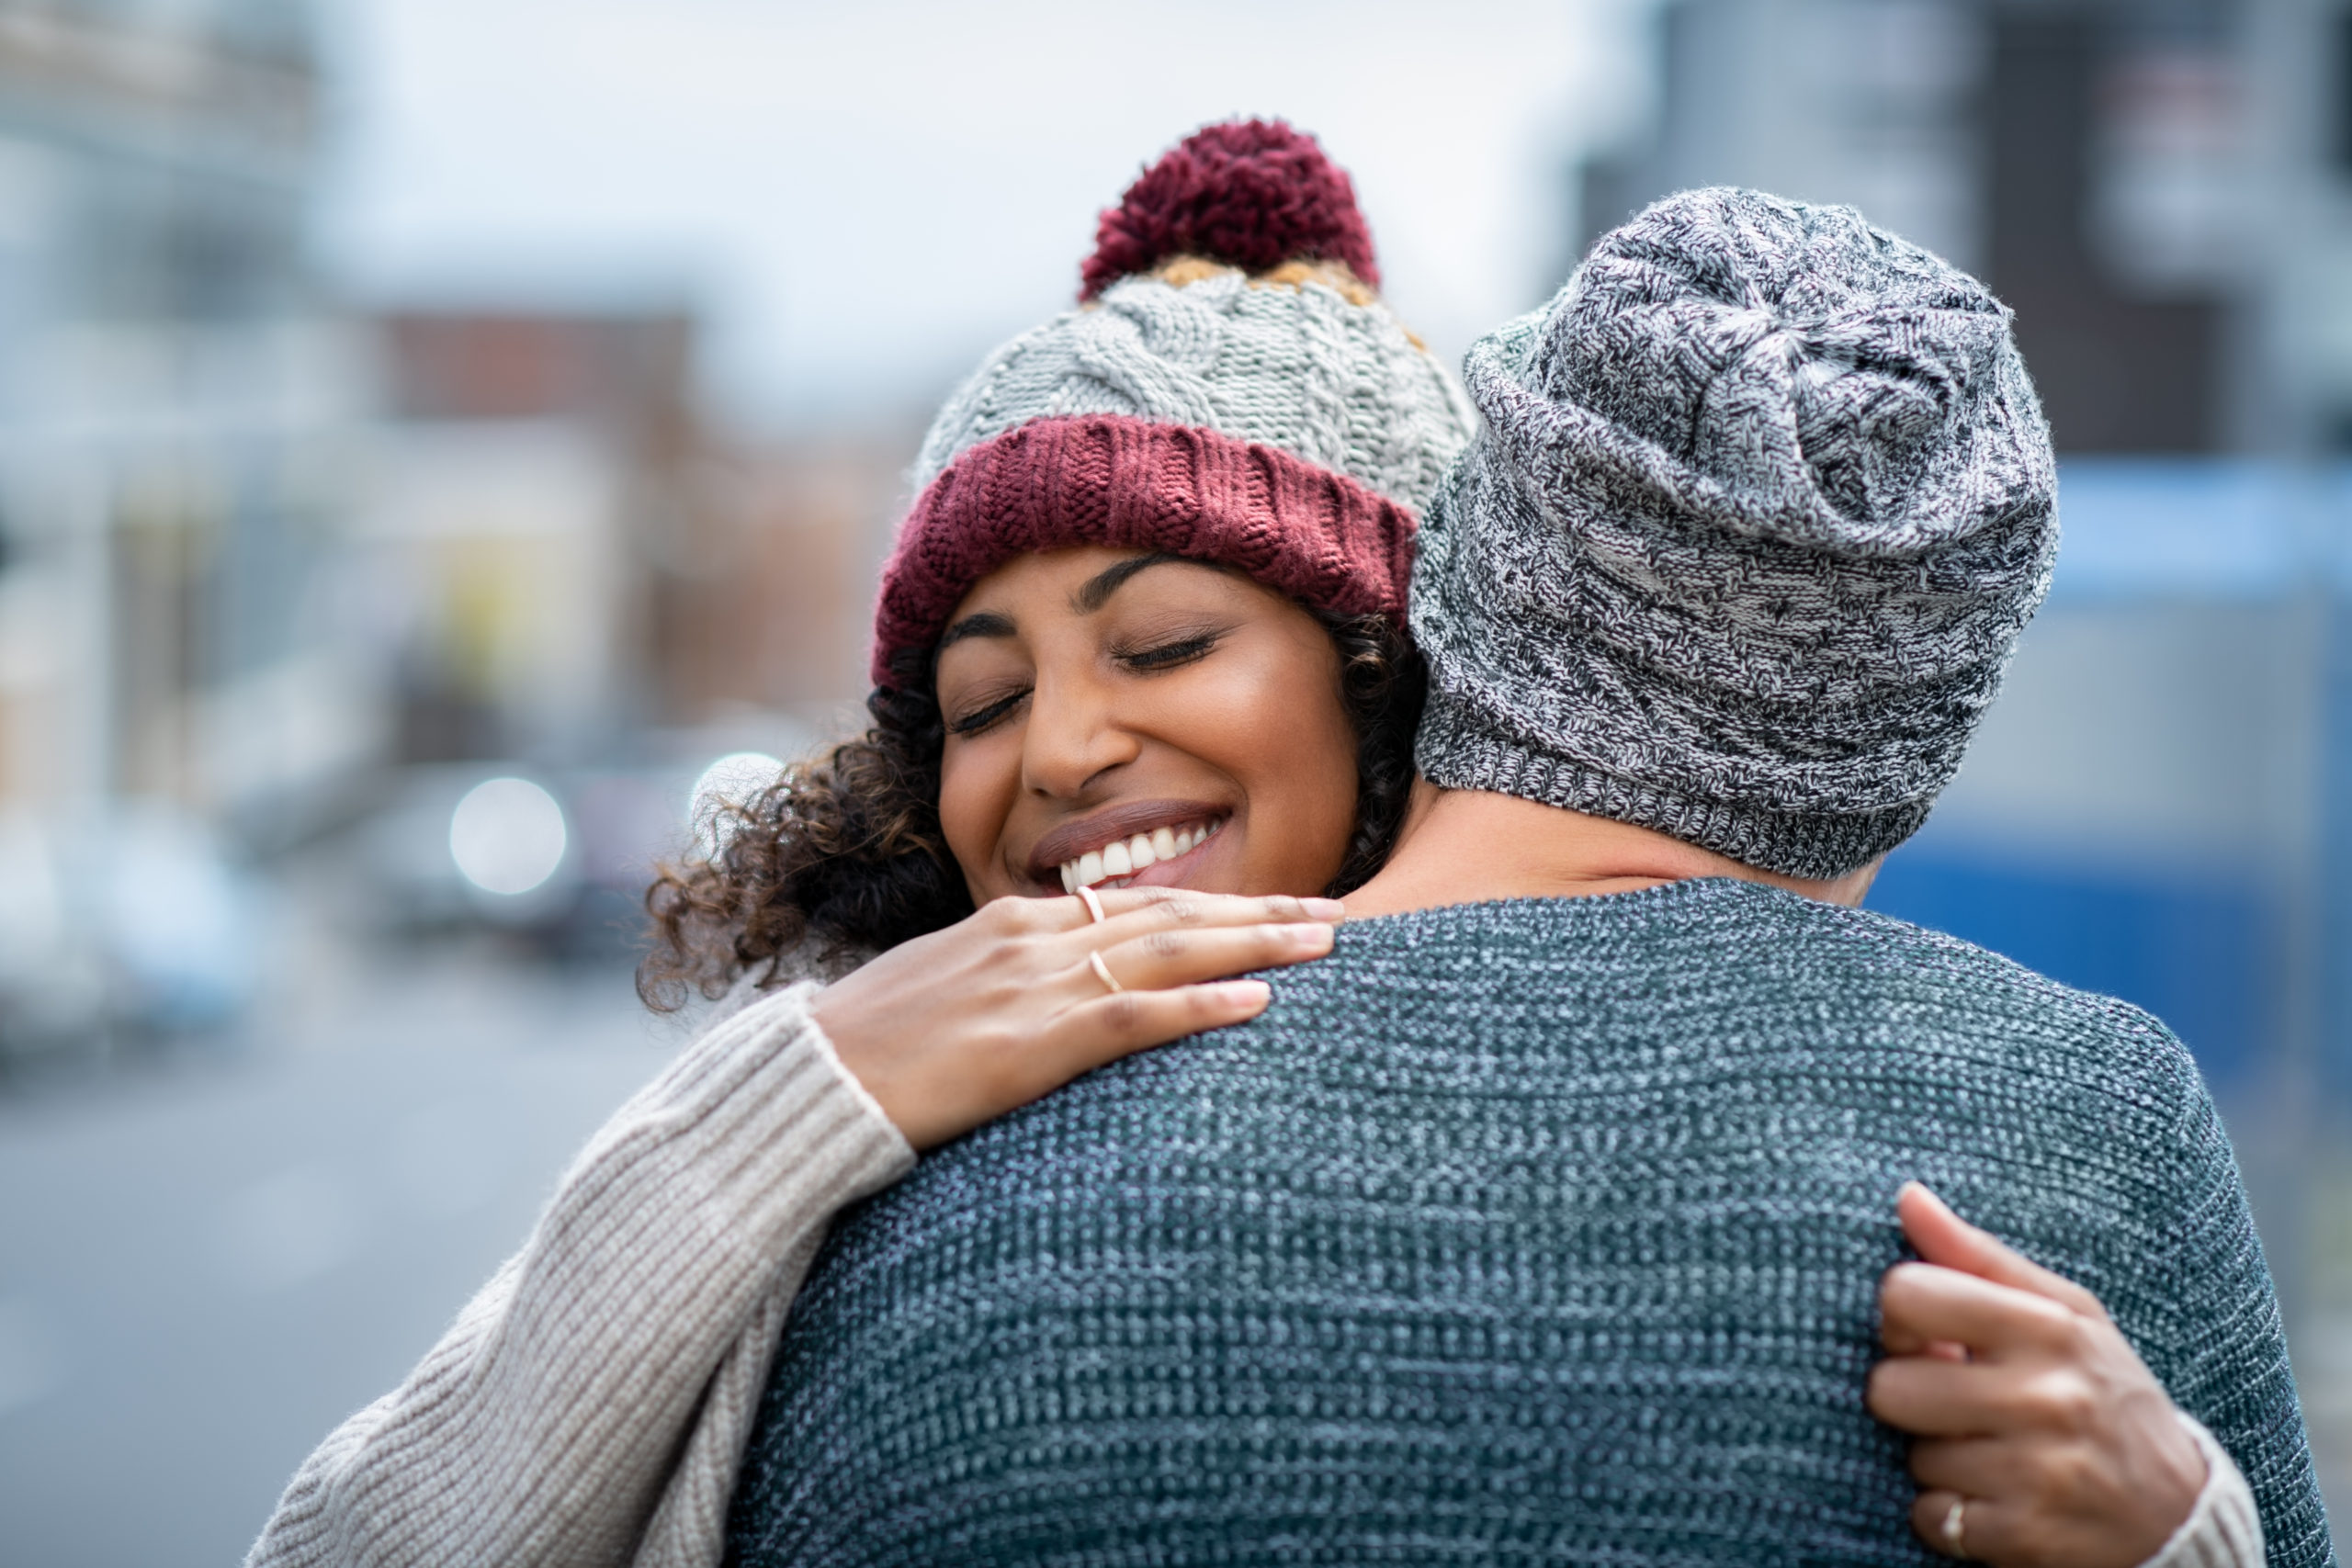 21 Reasons Why Hugs Are Good For You